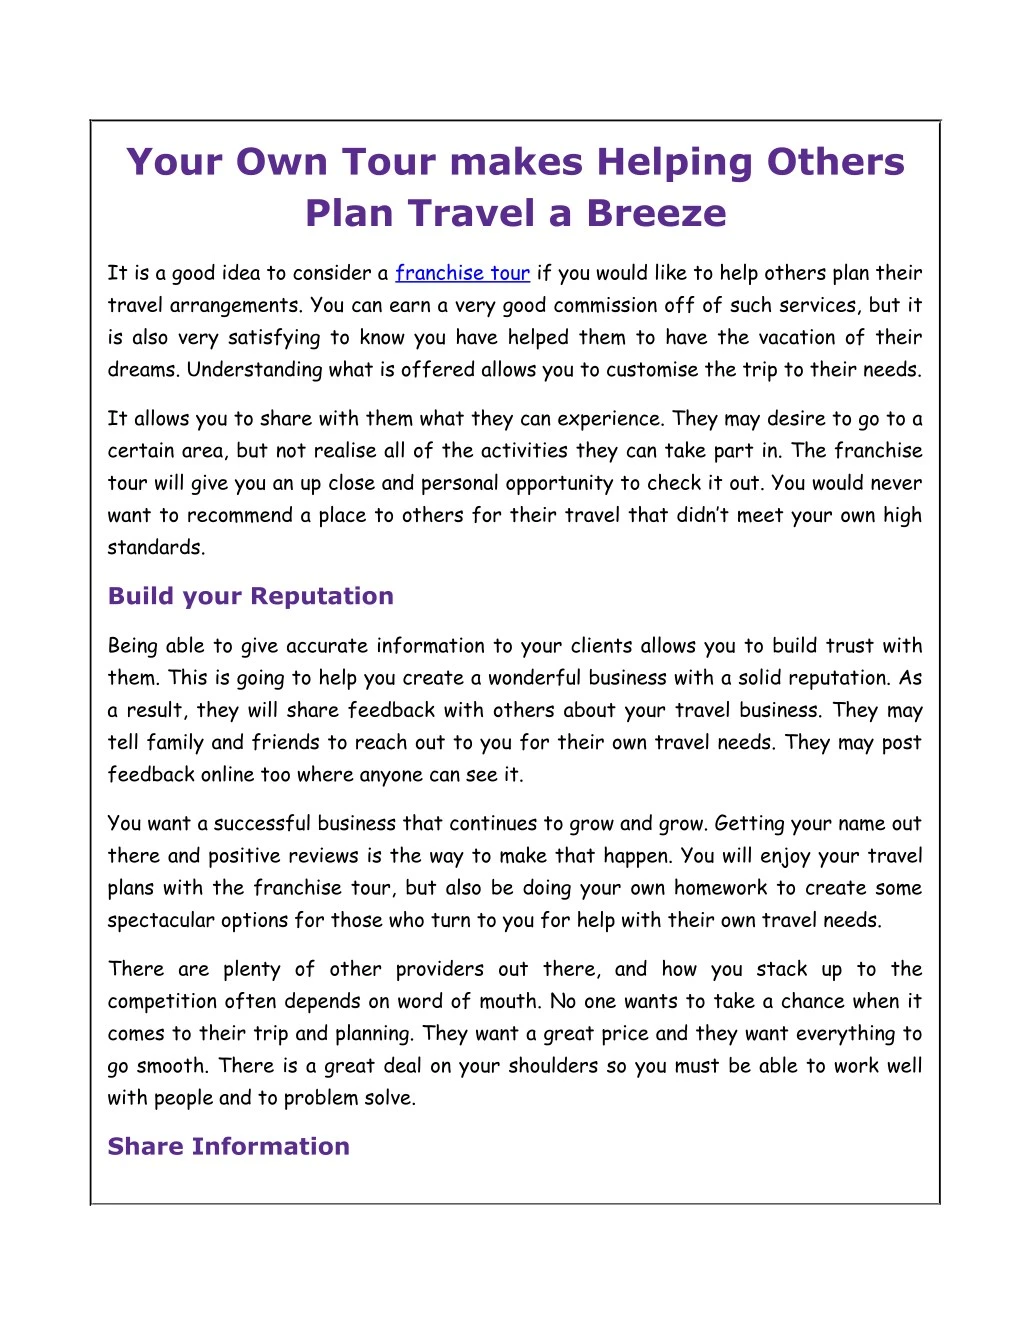 your own tour makes helping others plan travel